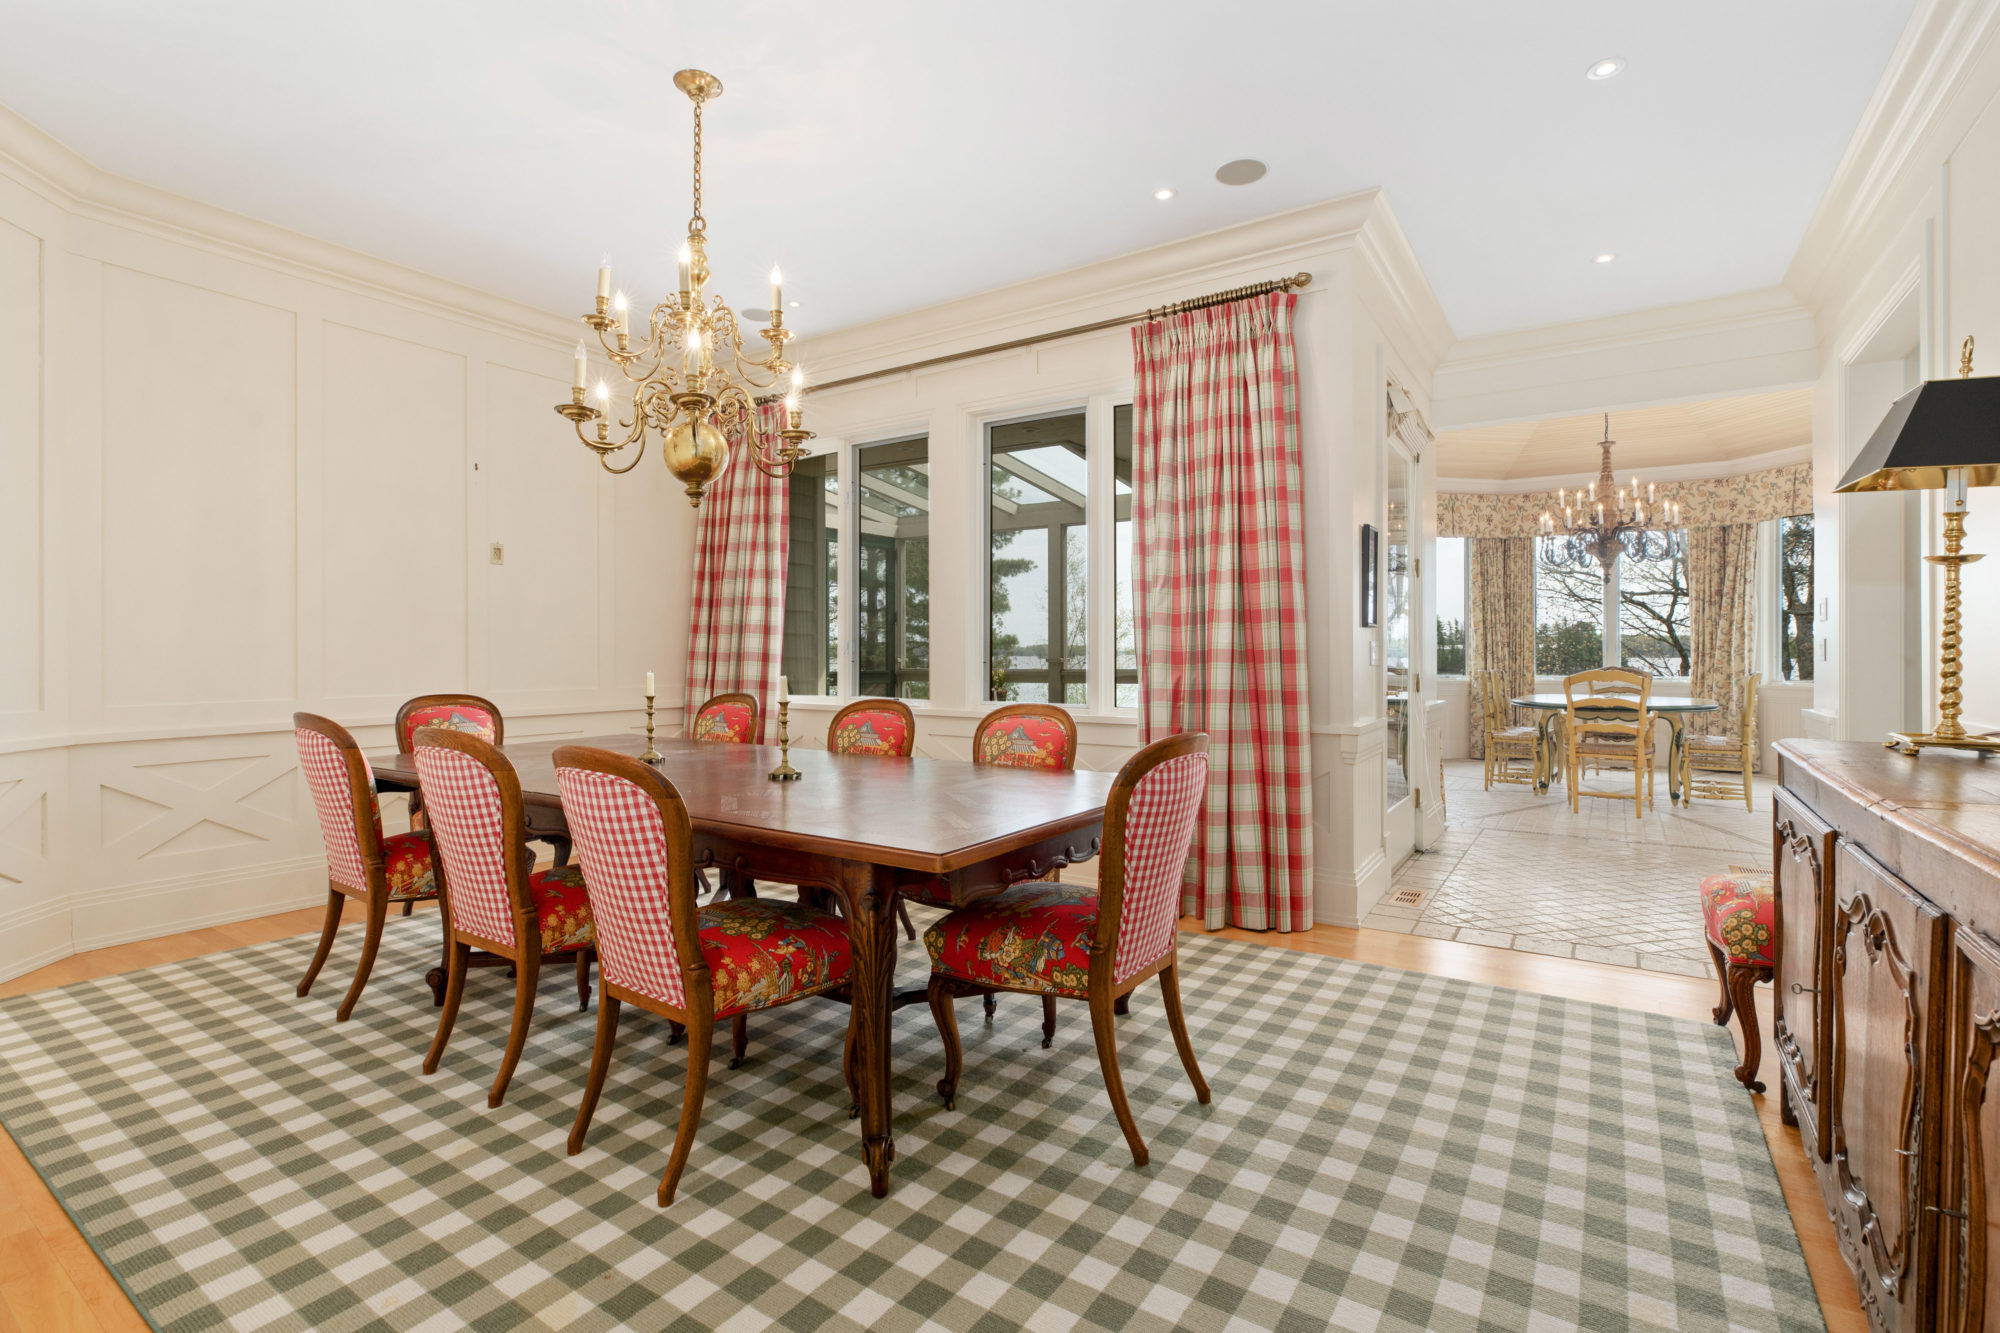 The home has both a formal dining room and a breakfast nook. 